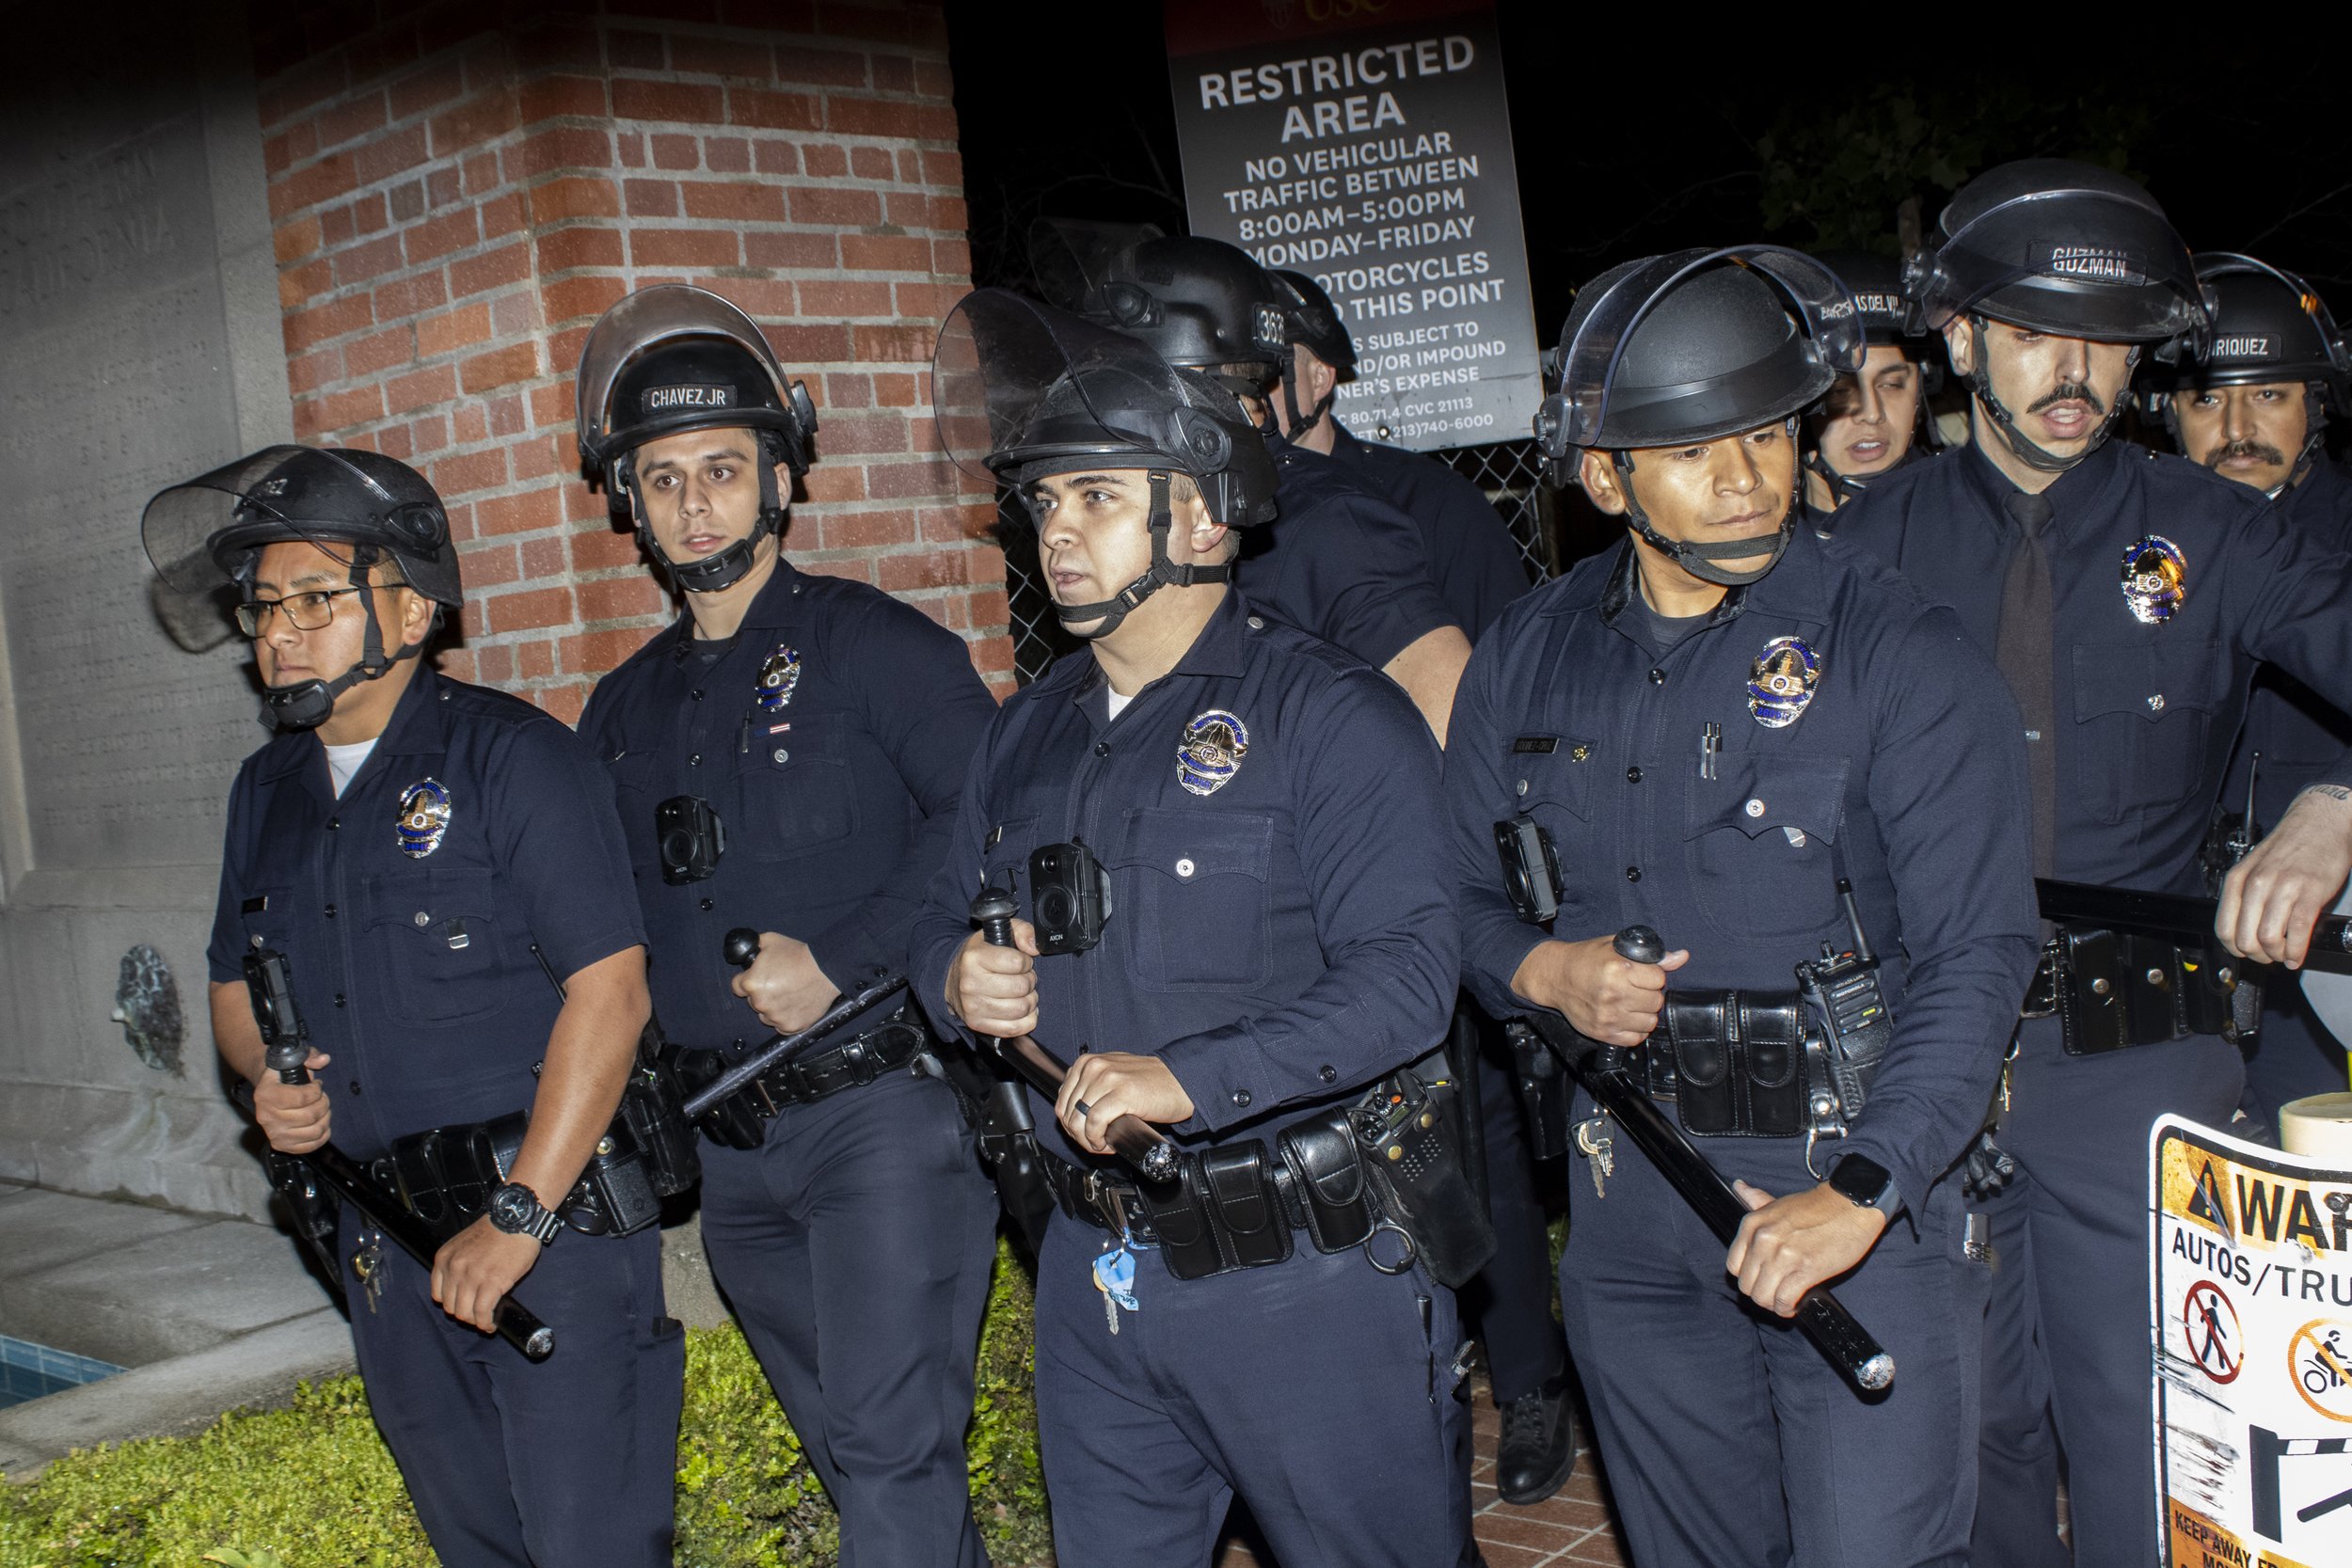  The University of Southern California Department of Security and Los Angeles Police Department officers walk their line down Trousdale Parkway moving protesters towards the exit on West Jefferson Blvd at The University of Southern California’s, in L